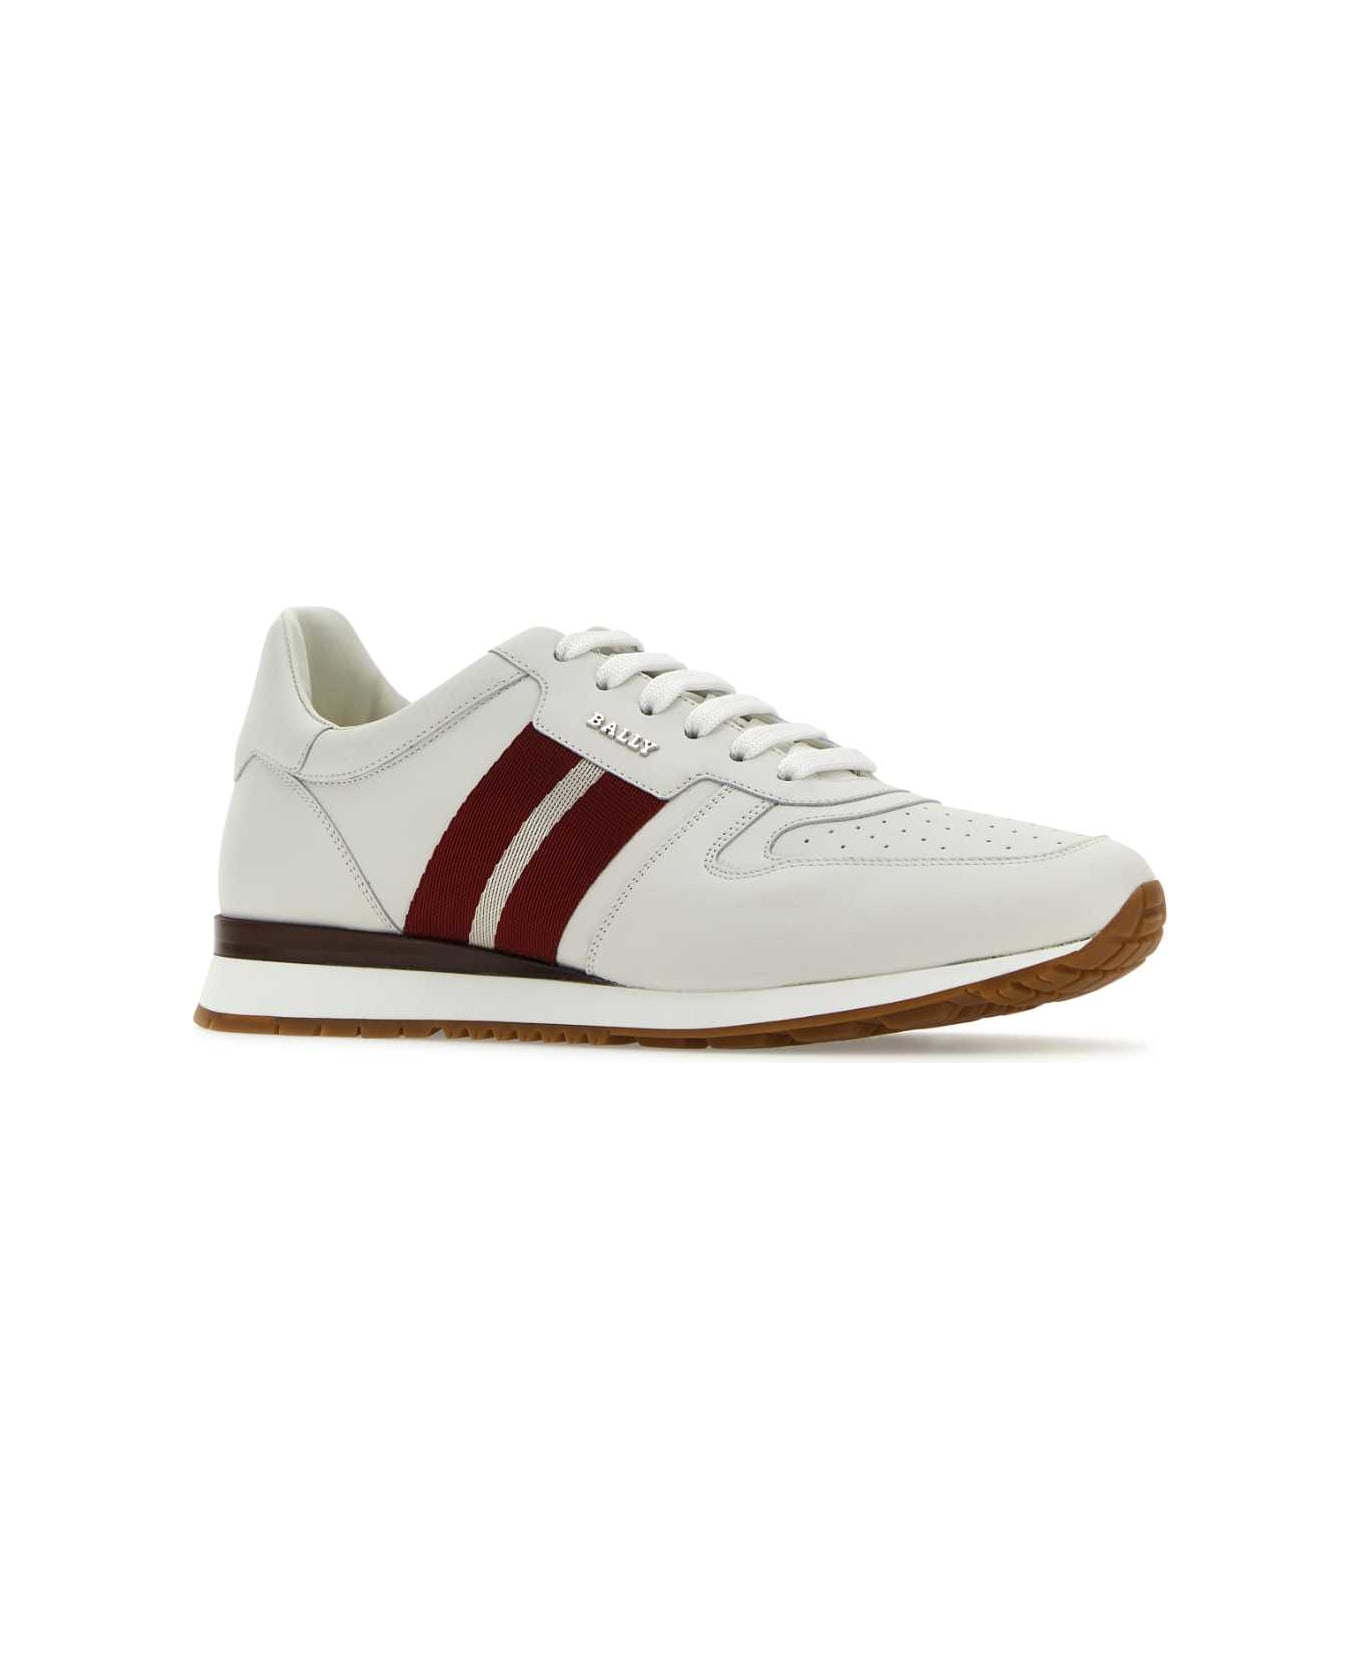 Bally Chalk Leather Astel Sneakers - F517